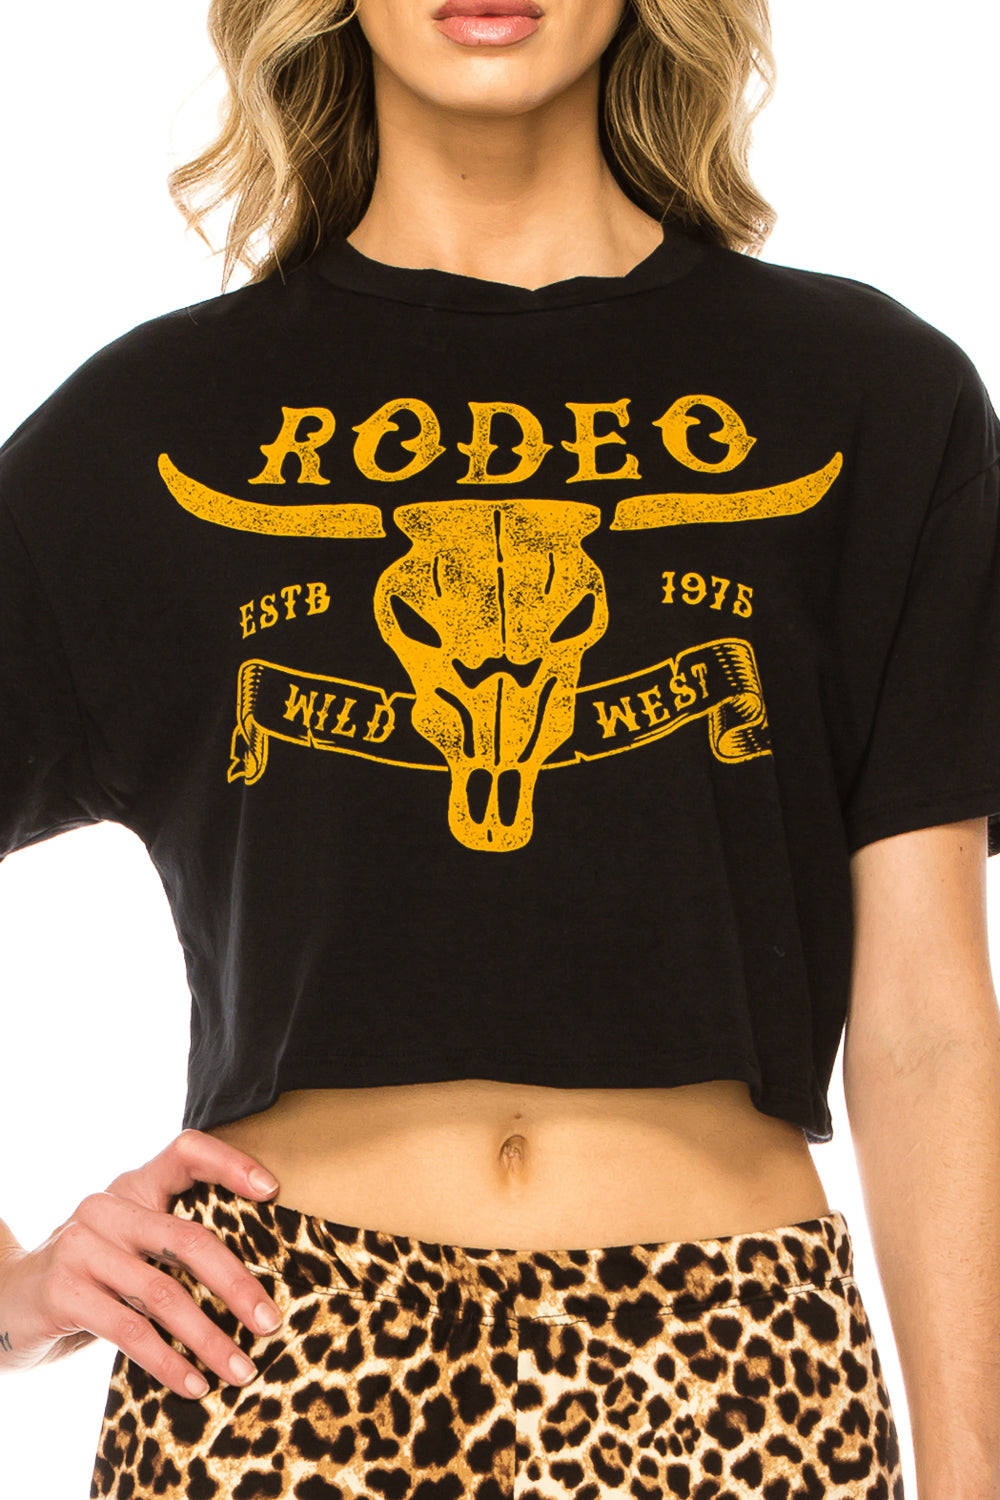 RODEO SHORT SLEEVE CROP TOP - Trailsclothing.com